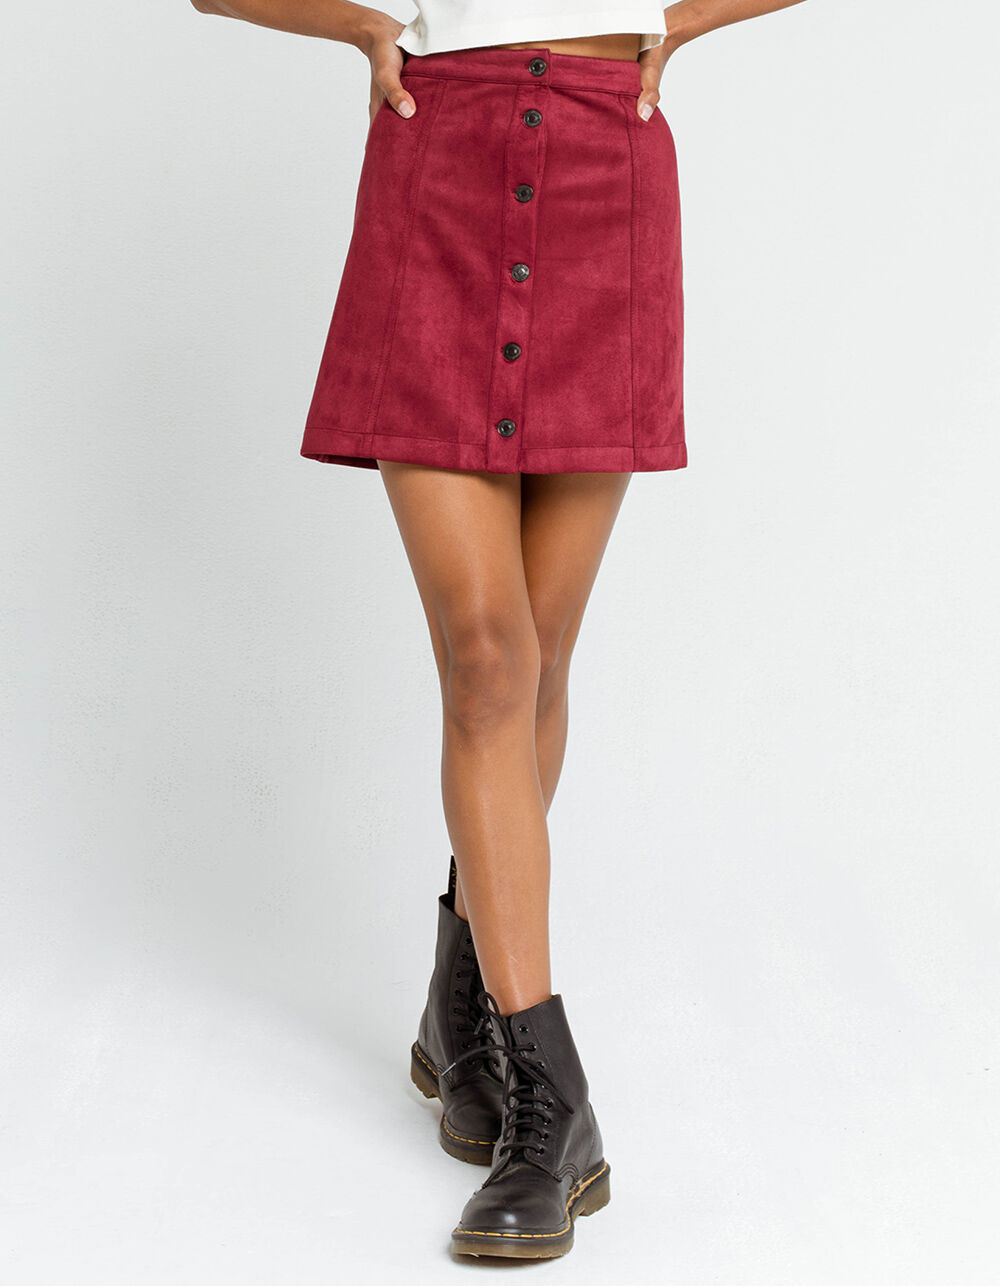 SKY AND SPARROW Button Front Faux Suede Wine Mini Skirt - WINE | Tillys